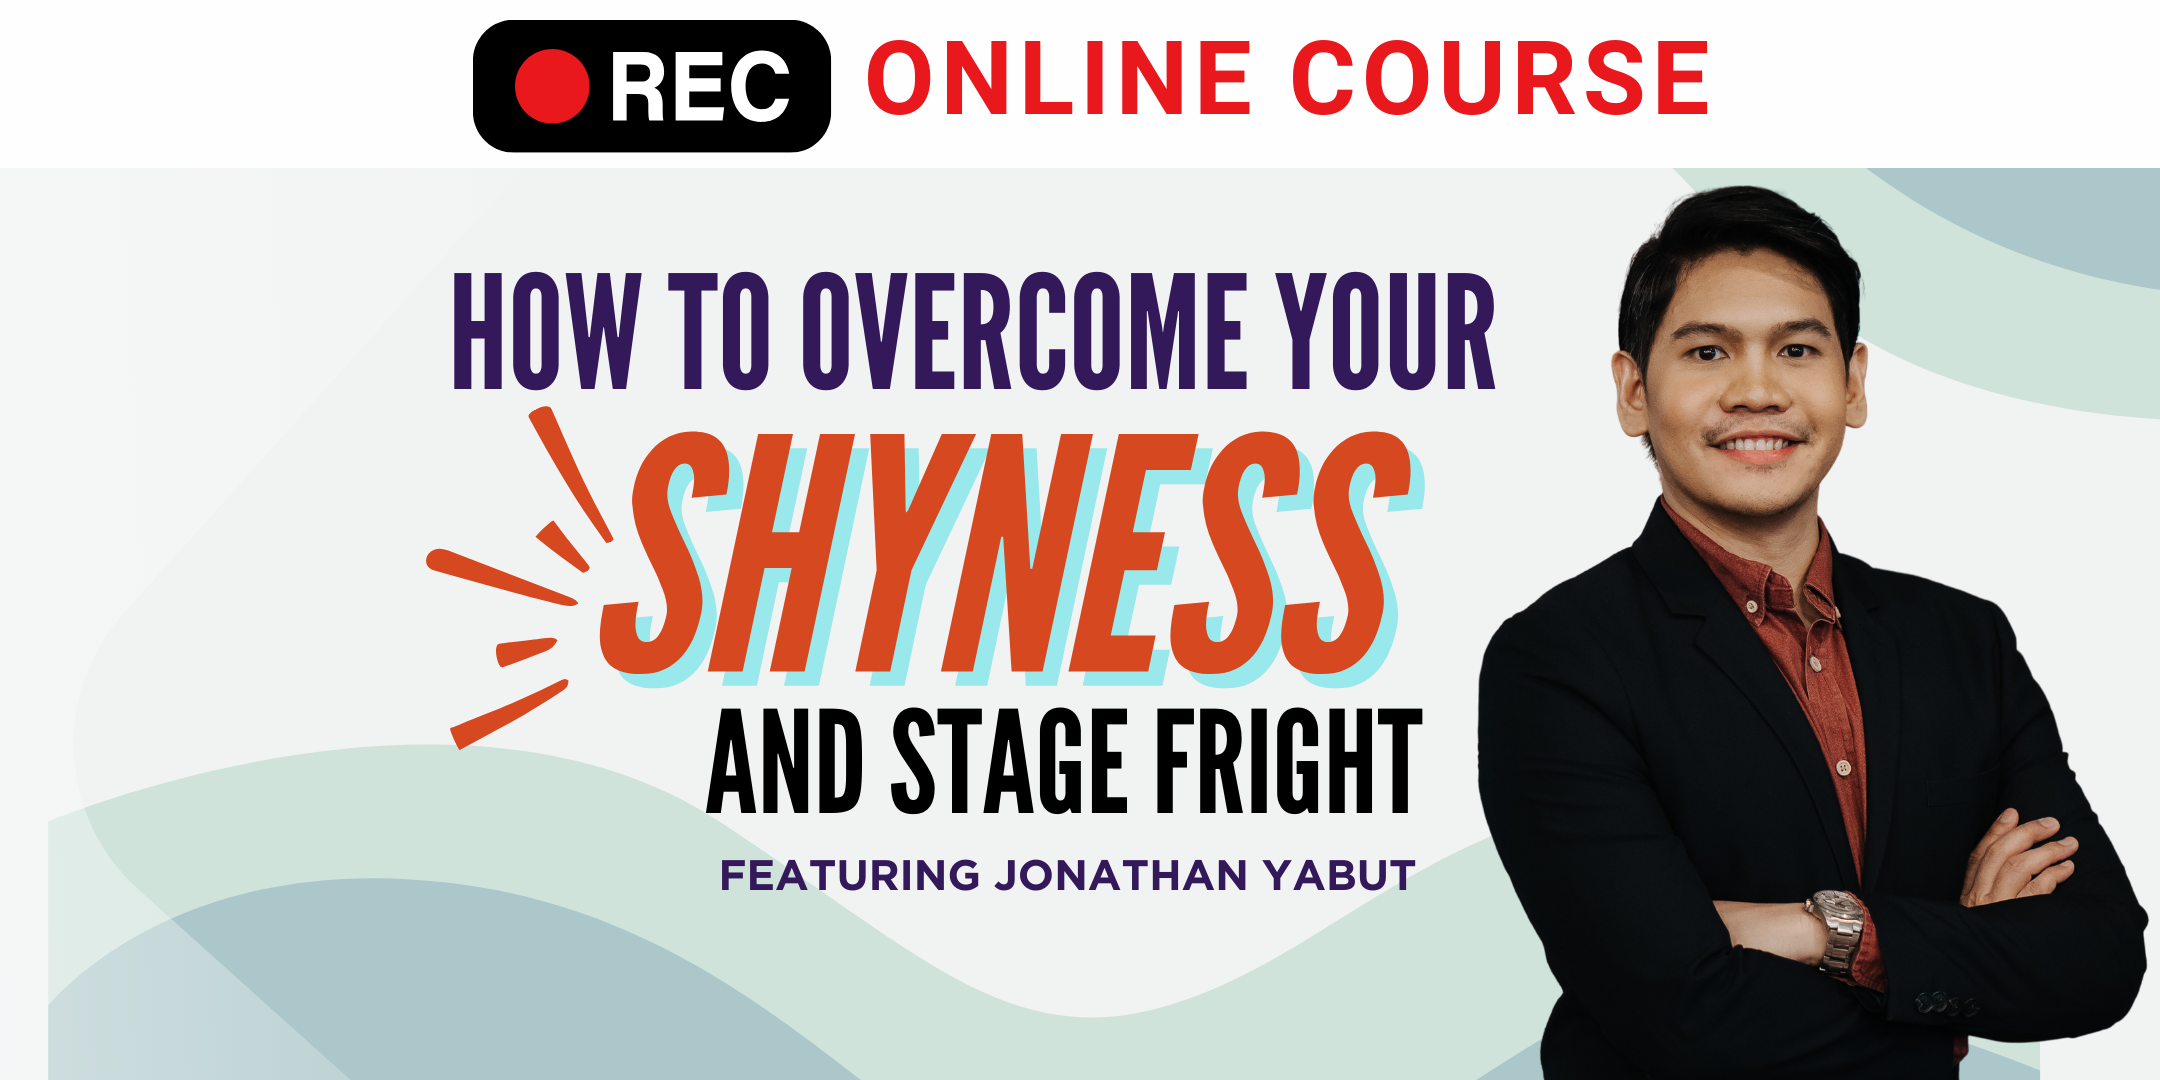 How to Manage Your Shyness & Stage Fright